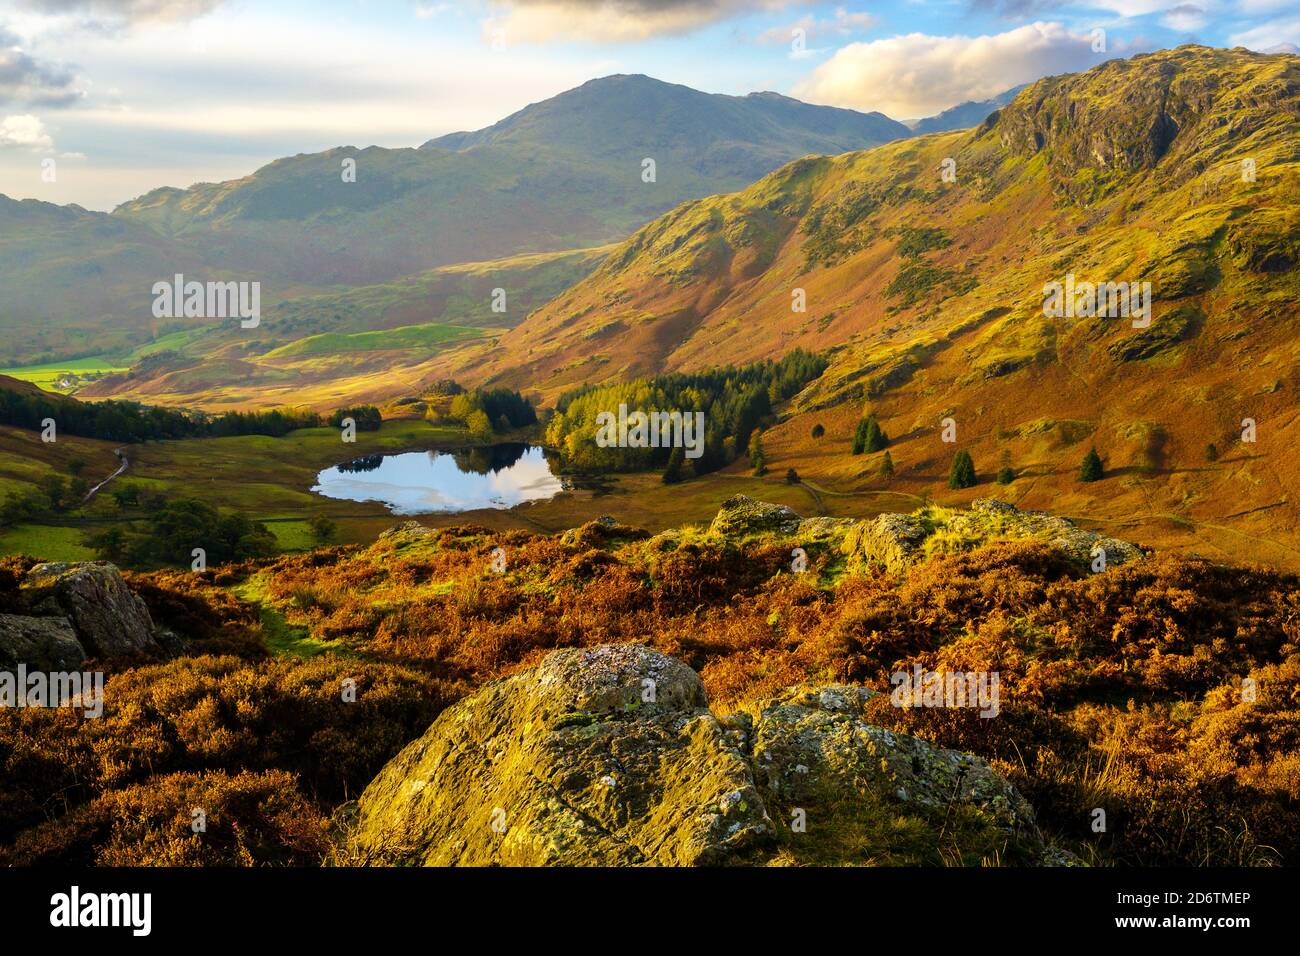 Blea Tarn with Wetherlam in distance. Lake District National Park Stock Photo